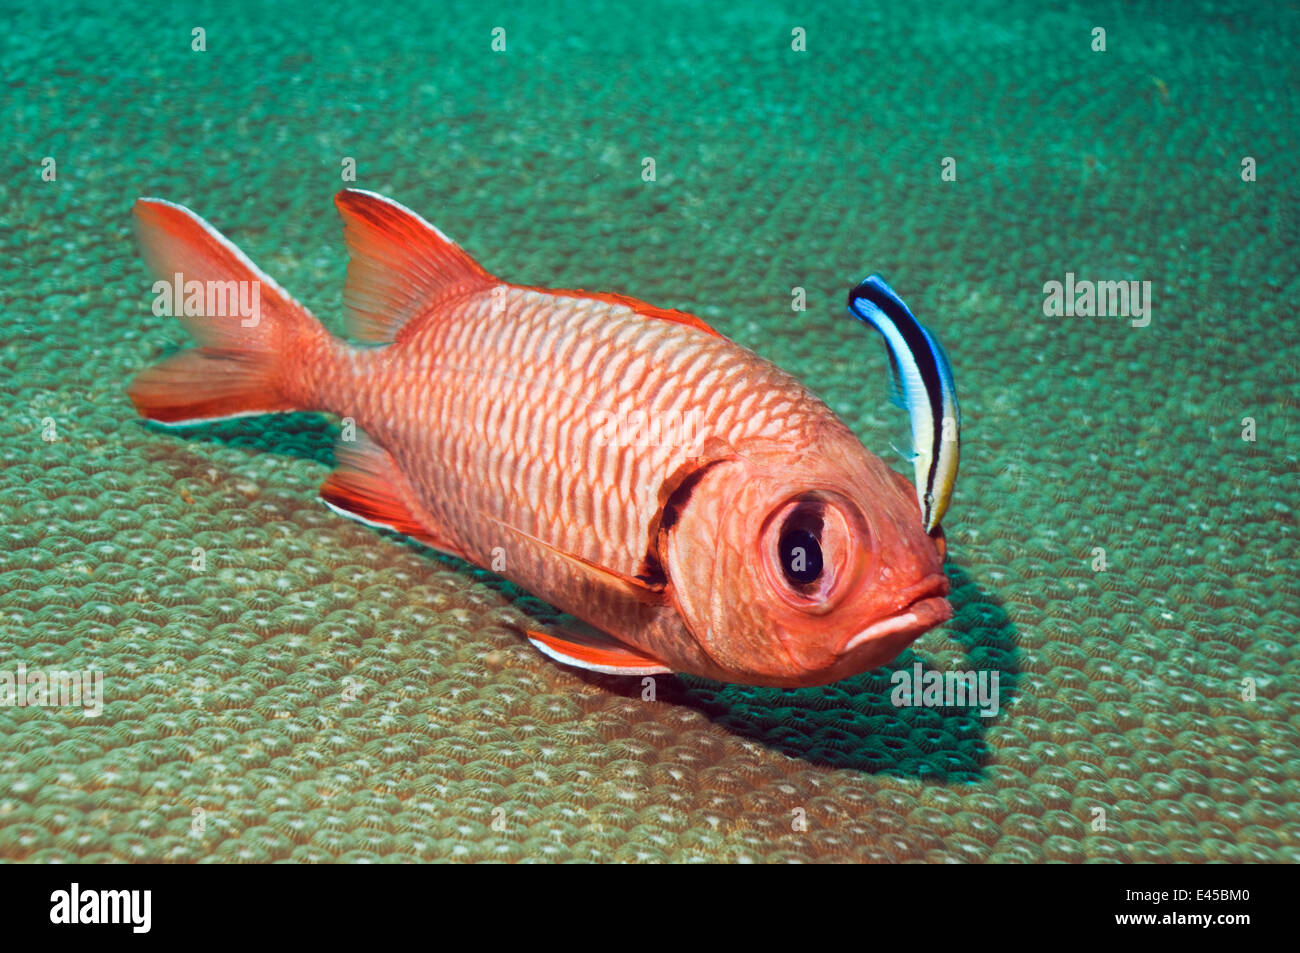 Red soldierfish (Myripristis murdjan) being cleaned by a Bluestreak cleaner wrasse (Labroides dimidiatus), Andaman Sea, Thailand Stock Photo